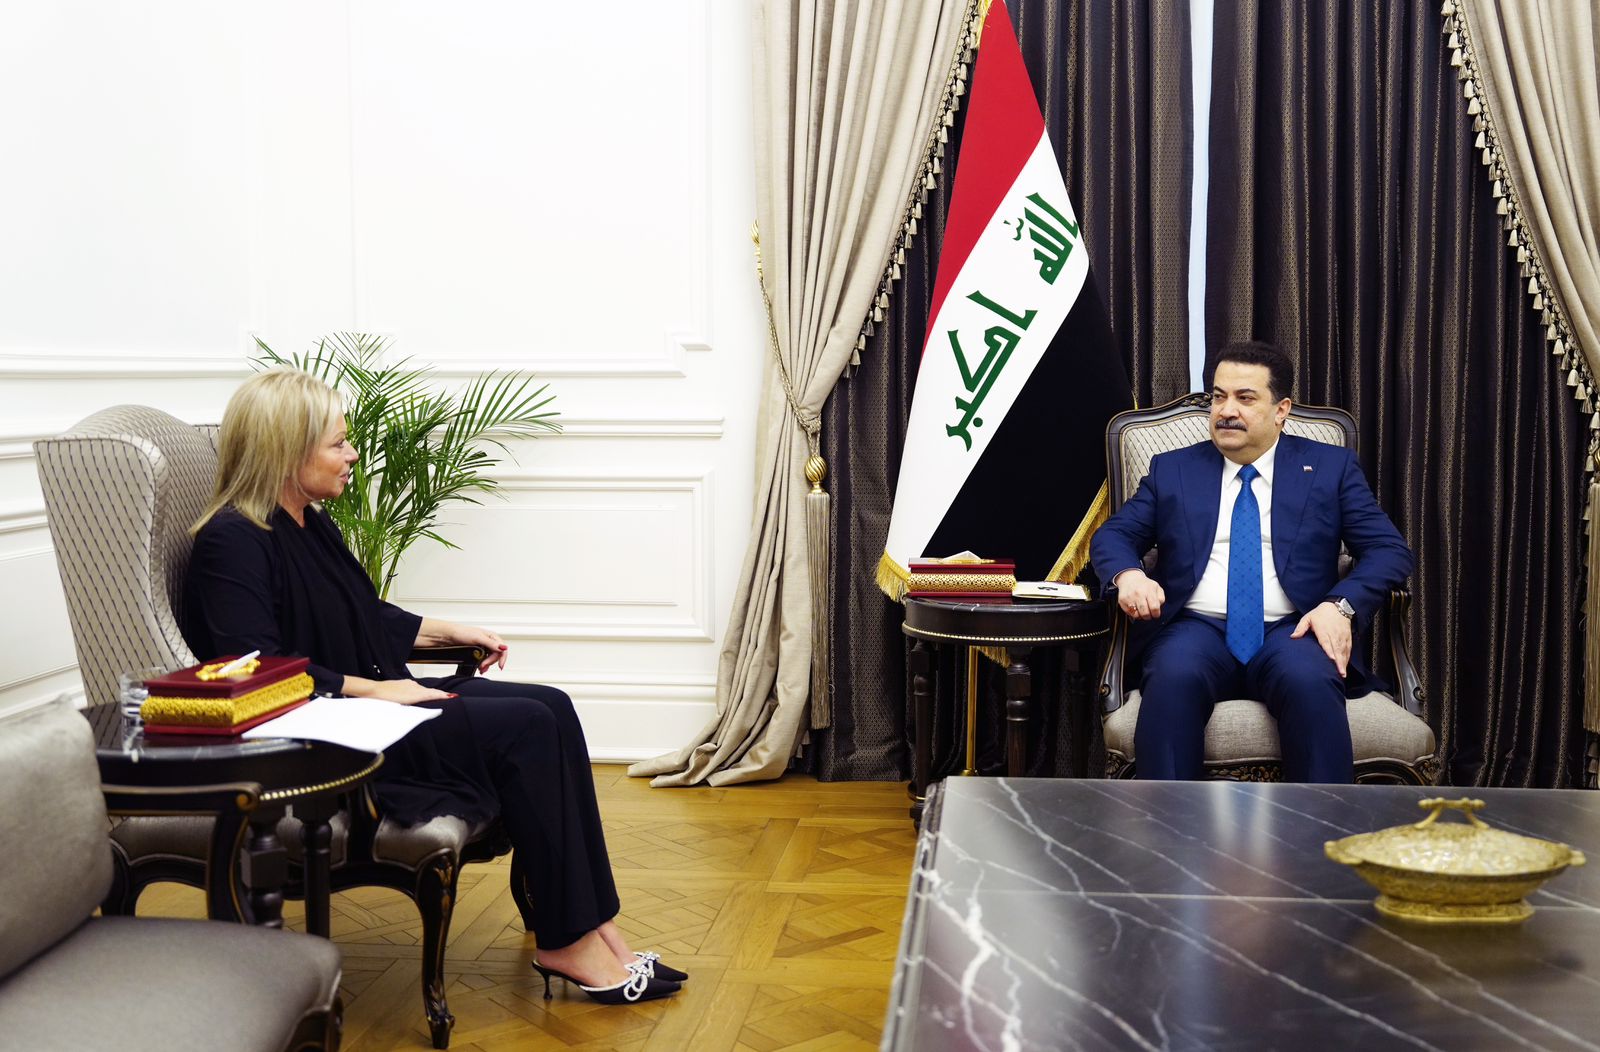 Iraq's PM discusses UN cooperation and displacement issues with special representative